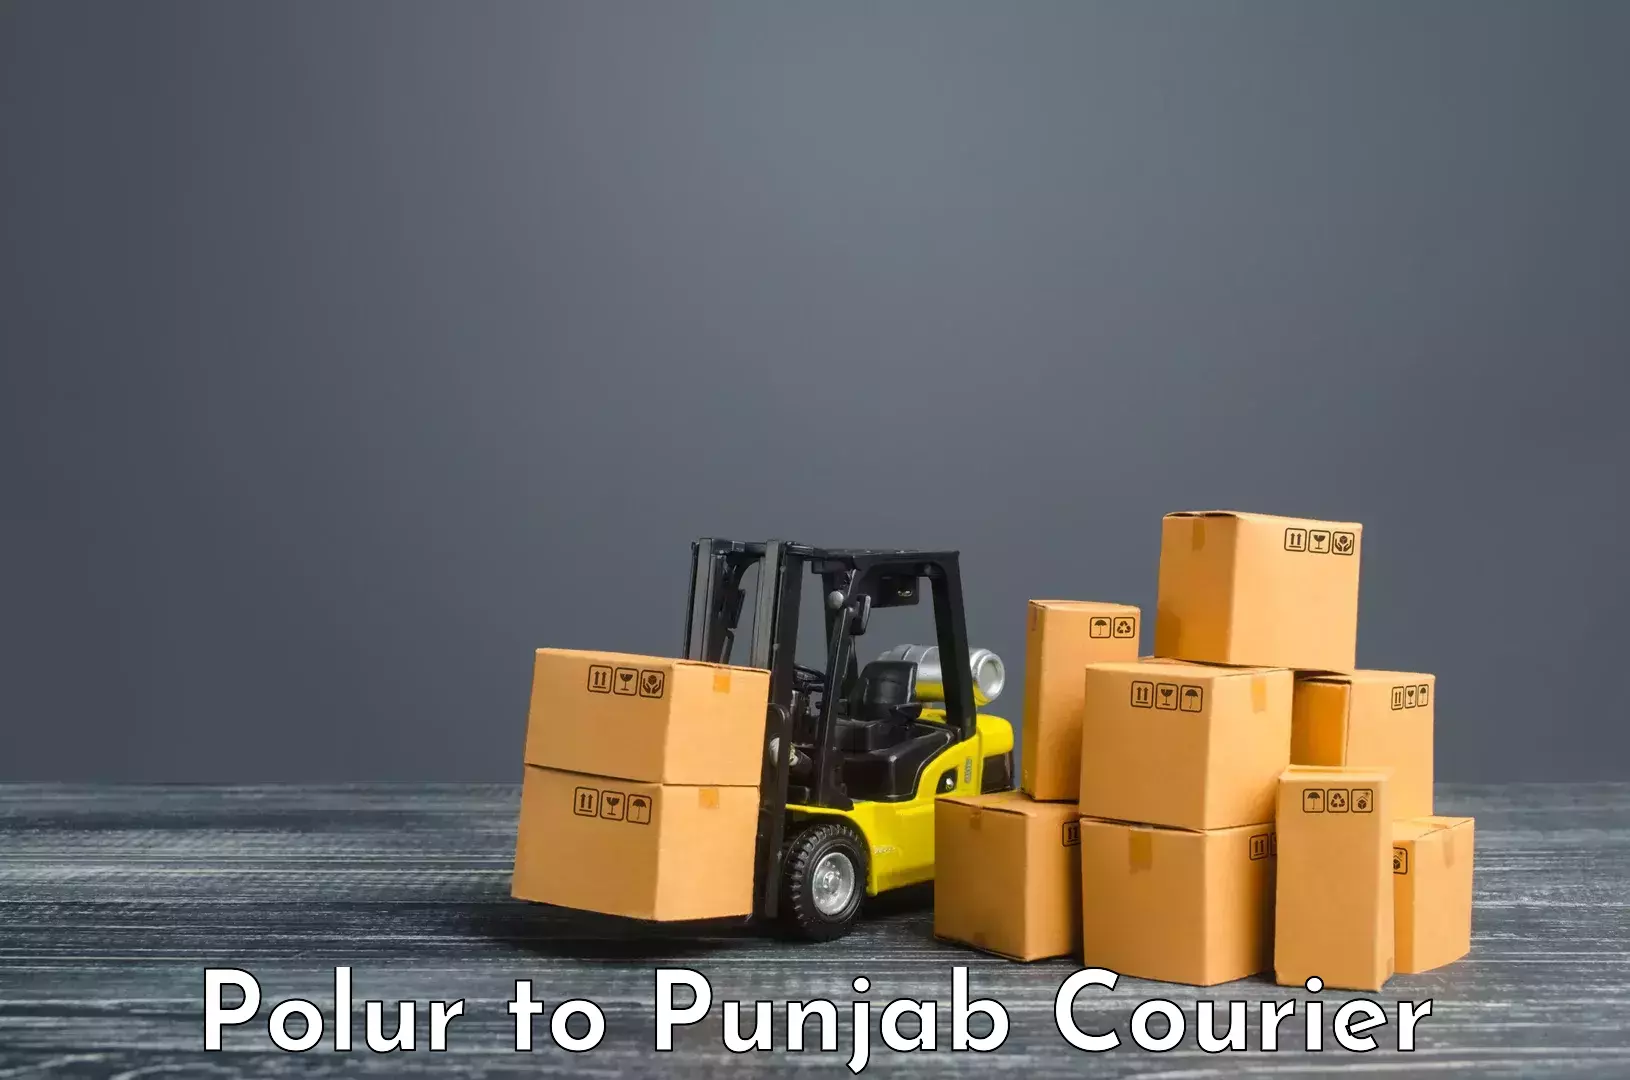 Wholesale parcel delivery in Polur to Mohali